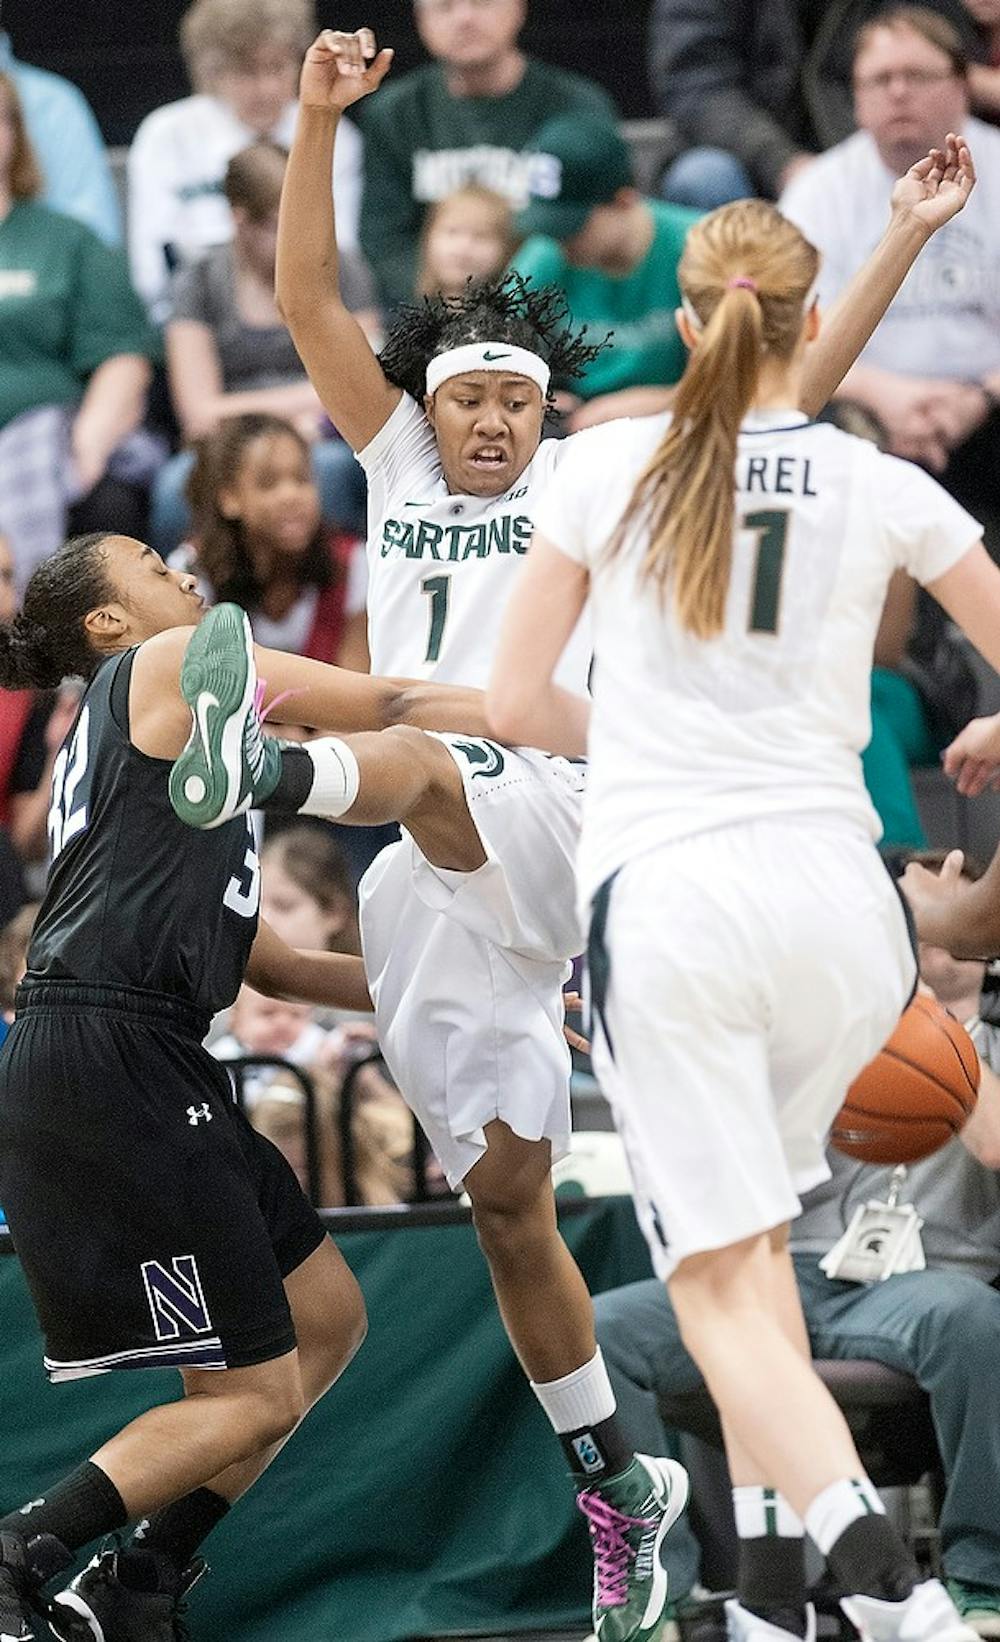 	<p>Senior guard Jasmine Thomas jumps to try to block a shot from Northwestern guard La&#8217;Terria Taylor during the game Feb. 20, 2013, at Breslin Center. <span class="caps">MSU</span> beat Northwestern, 54-45, of which Thomas scored 10 points. Danyelle Morrow/The State News</p>